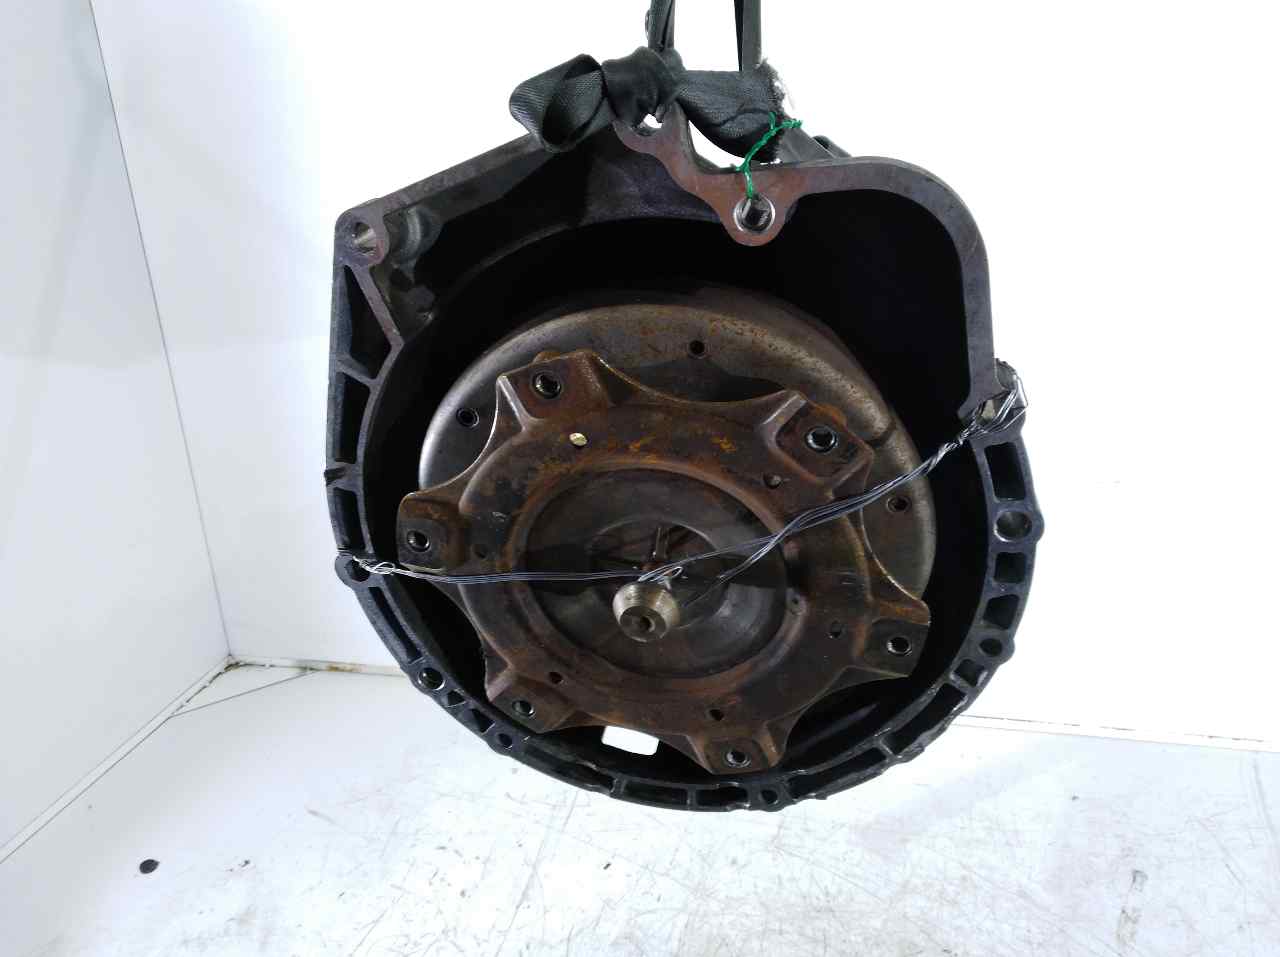 BMW 5 Series E60/E61 (2003-2010) Other part 6HP19, 6HP19, 6HP19 24513107